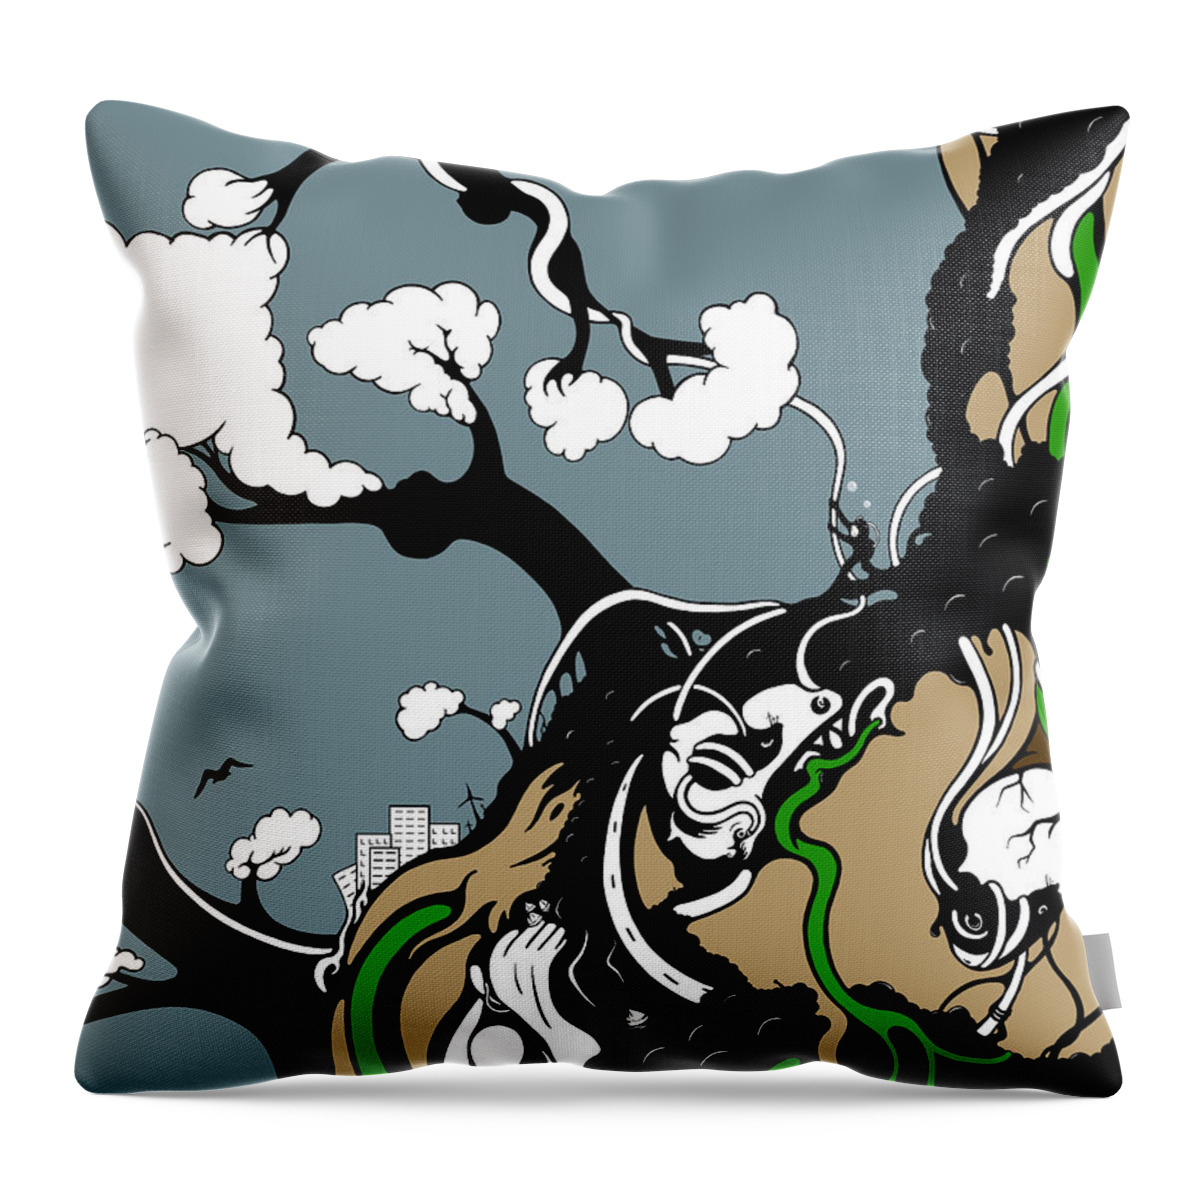 Female Throw Pillow featuring the digital art Humanity Rising by Craig Tilley